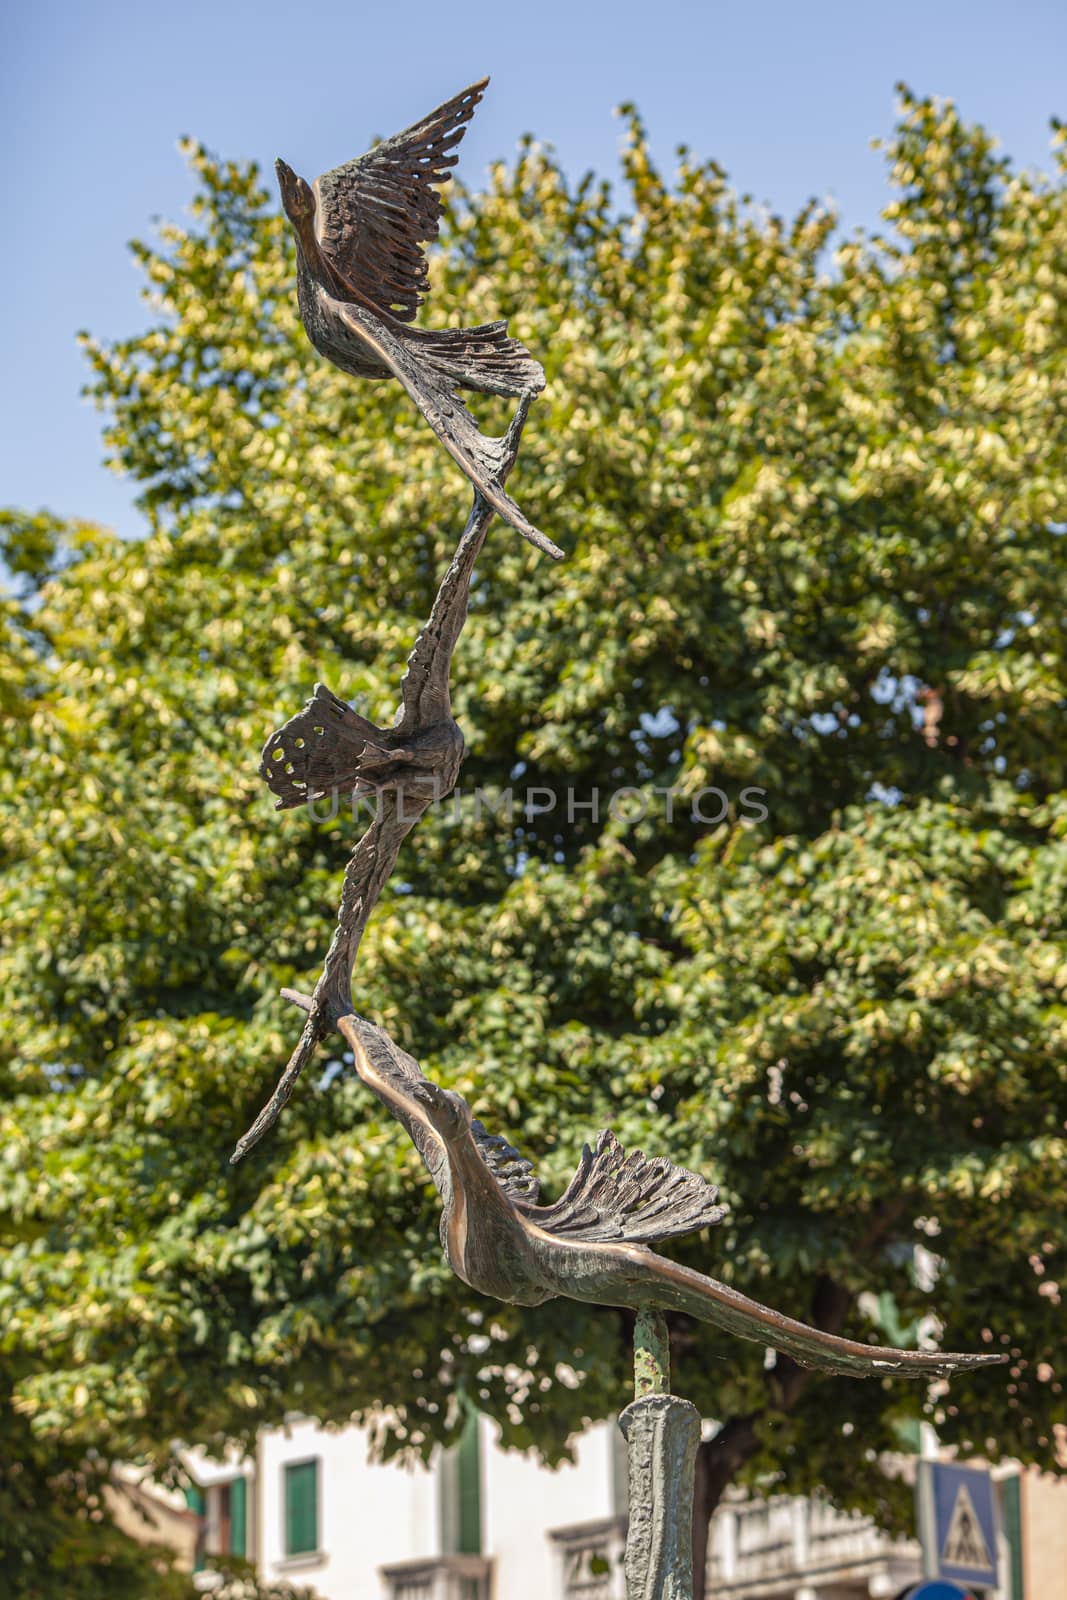 Bird statue in Treviso in Italy by pippocarlot